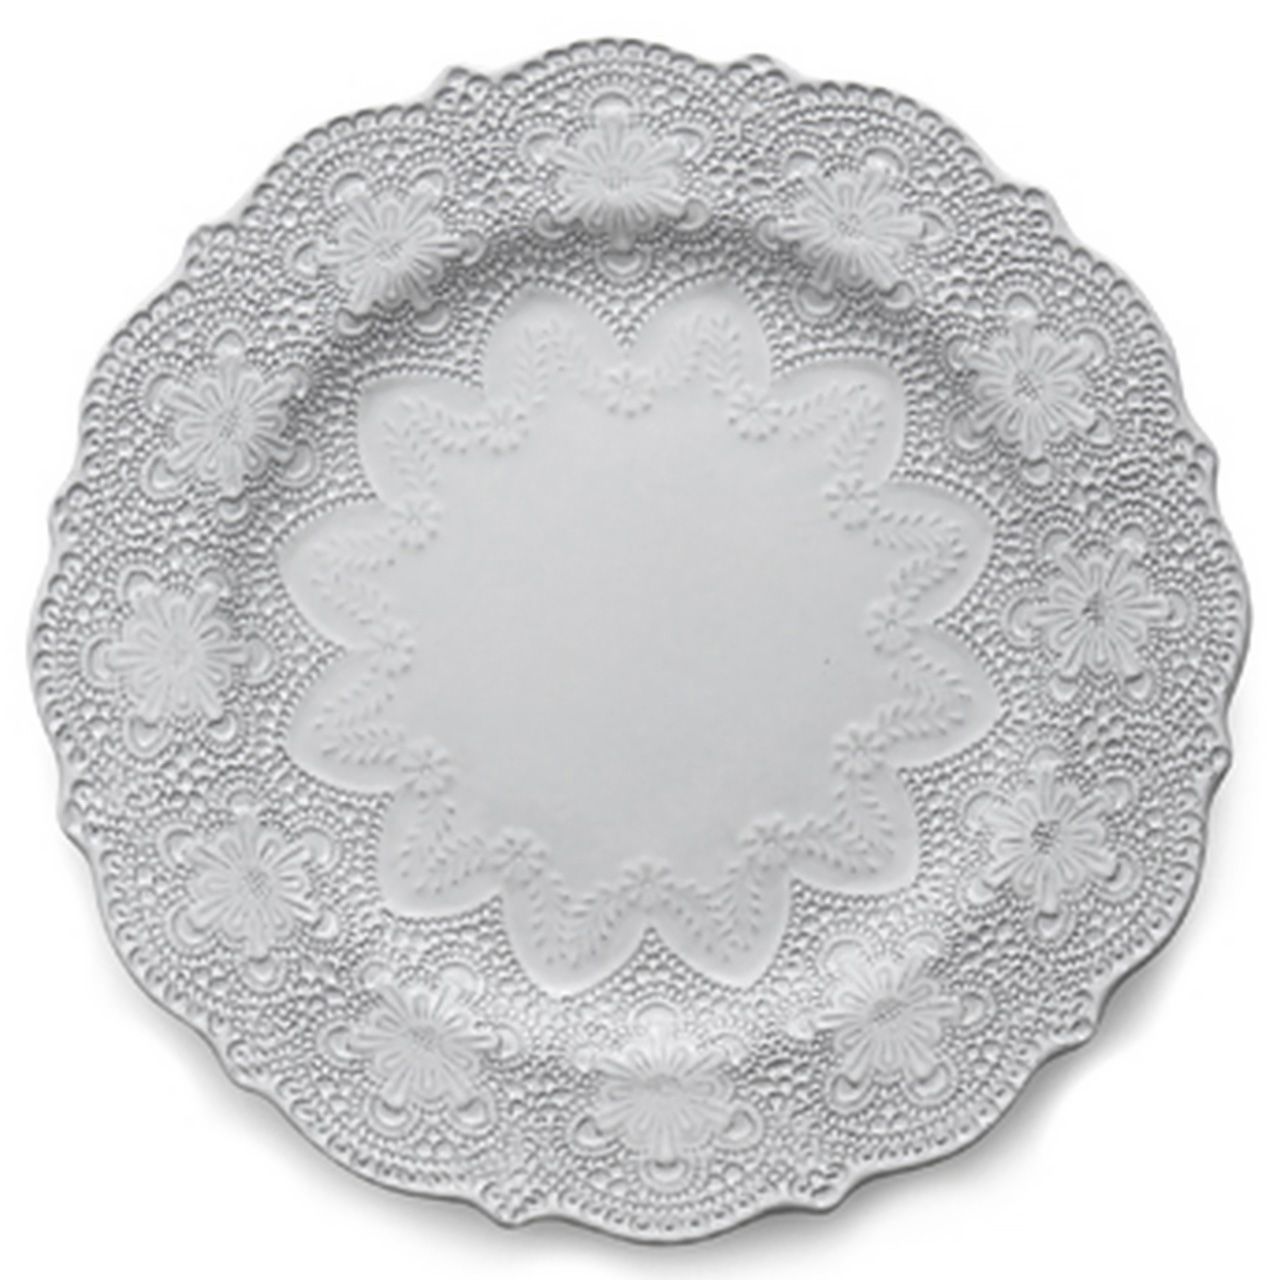 Arte Italica Merletto French Country White Ceramic Dinner Plate | Kathy Kuo Home